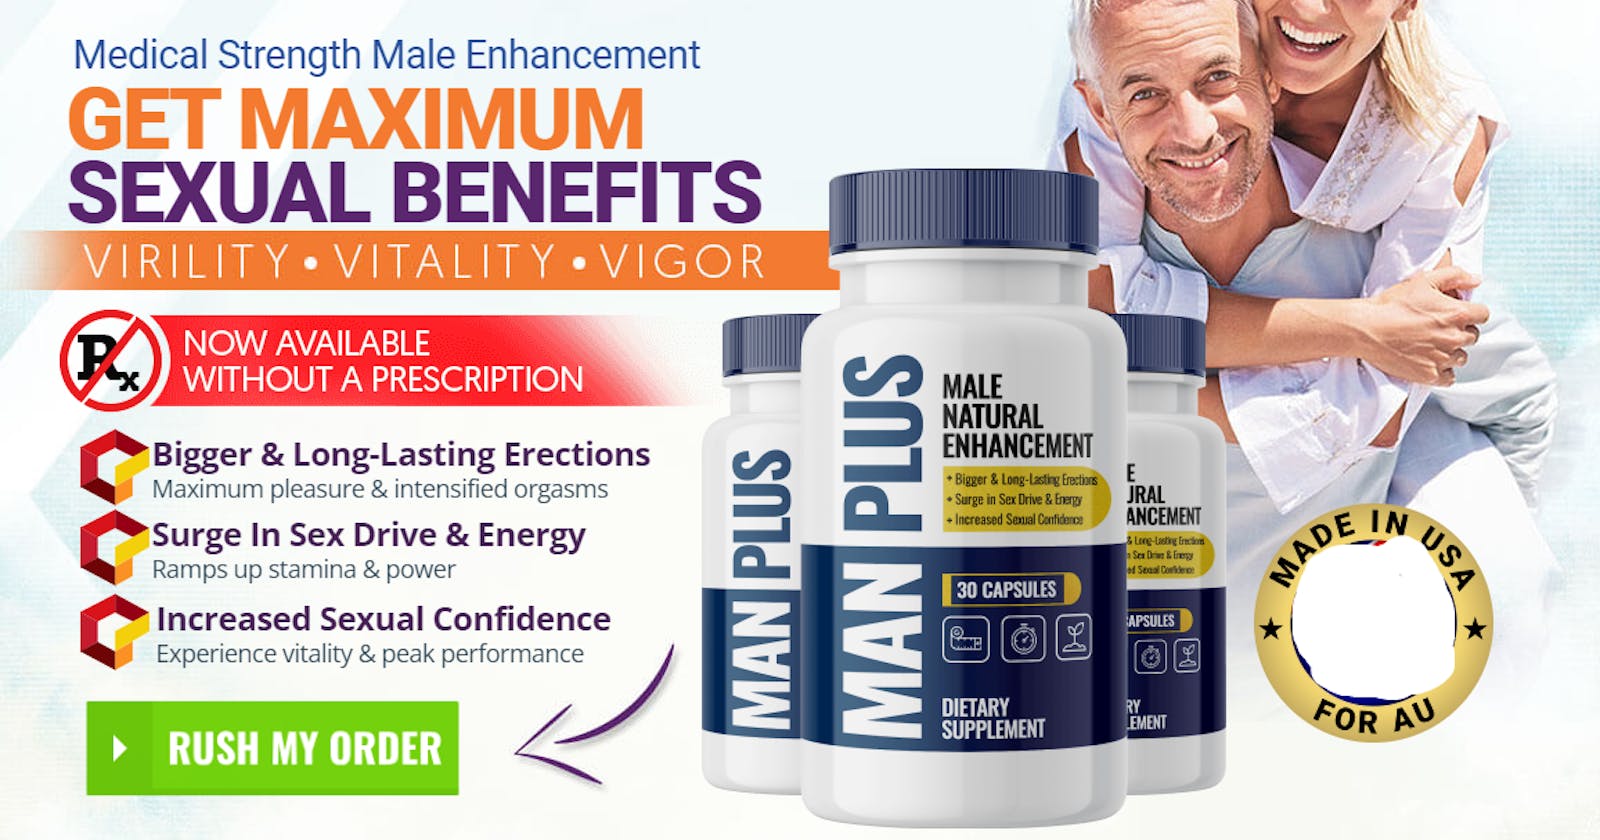 Man Plus Male Enhancement Reviews – Healthy Prostate Support That Works?